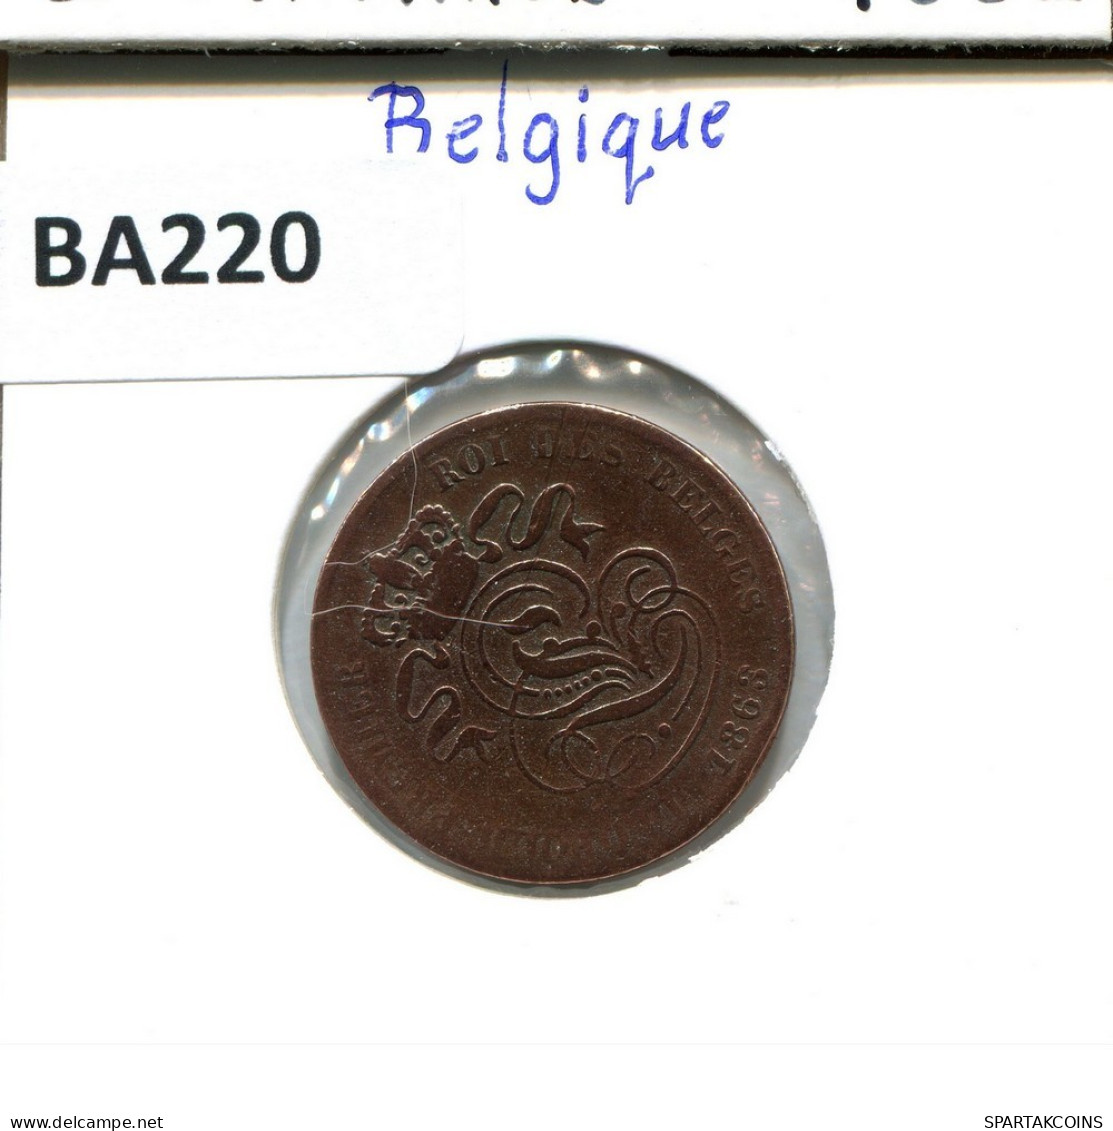 2 CENTIMES 1863 FRENCH Text BELGIUM Coin #BA220.U.A - 2 Centimes